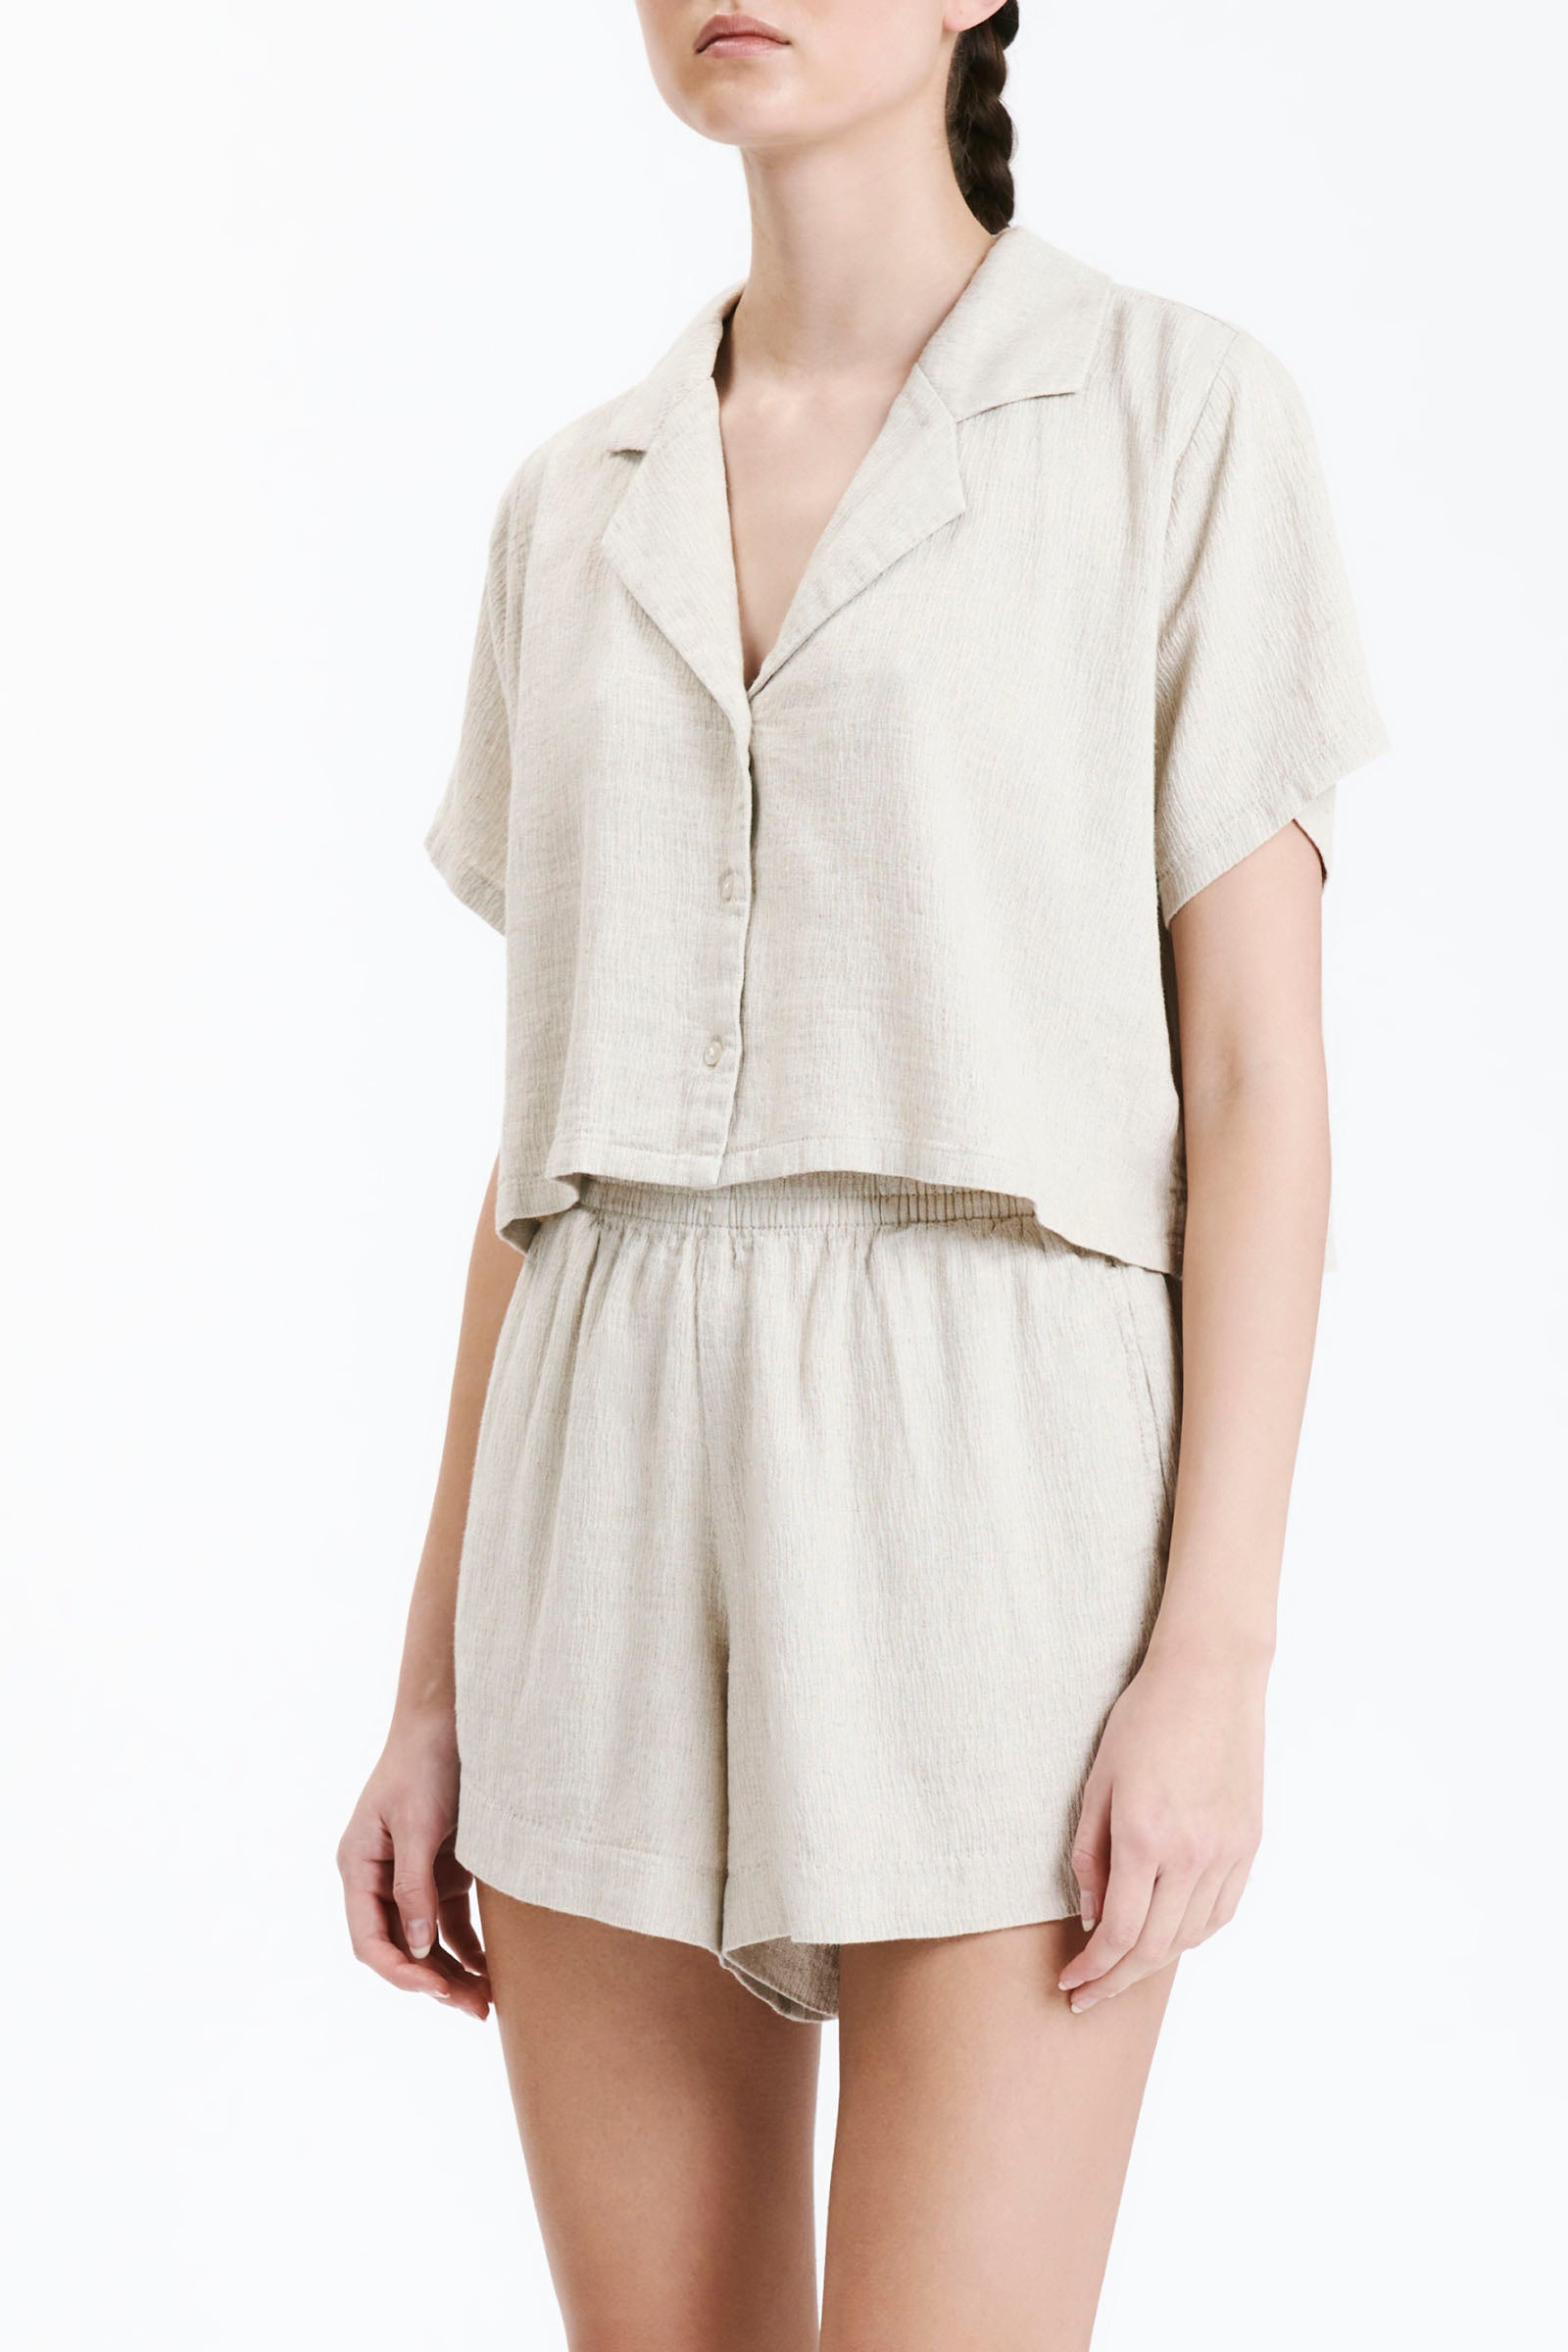 Ace Cropped Shirt Oat Colour - Linen Cotton blend With a Slight Crinkle Finish